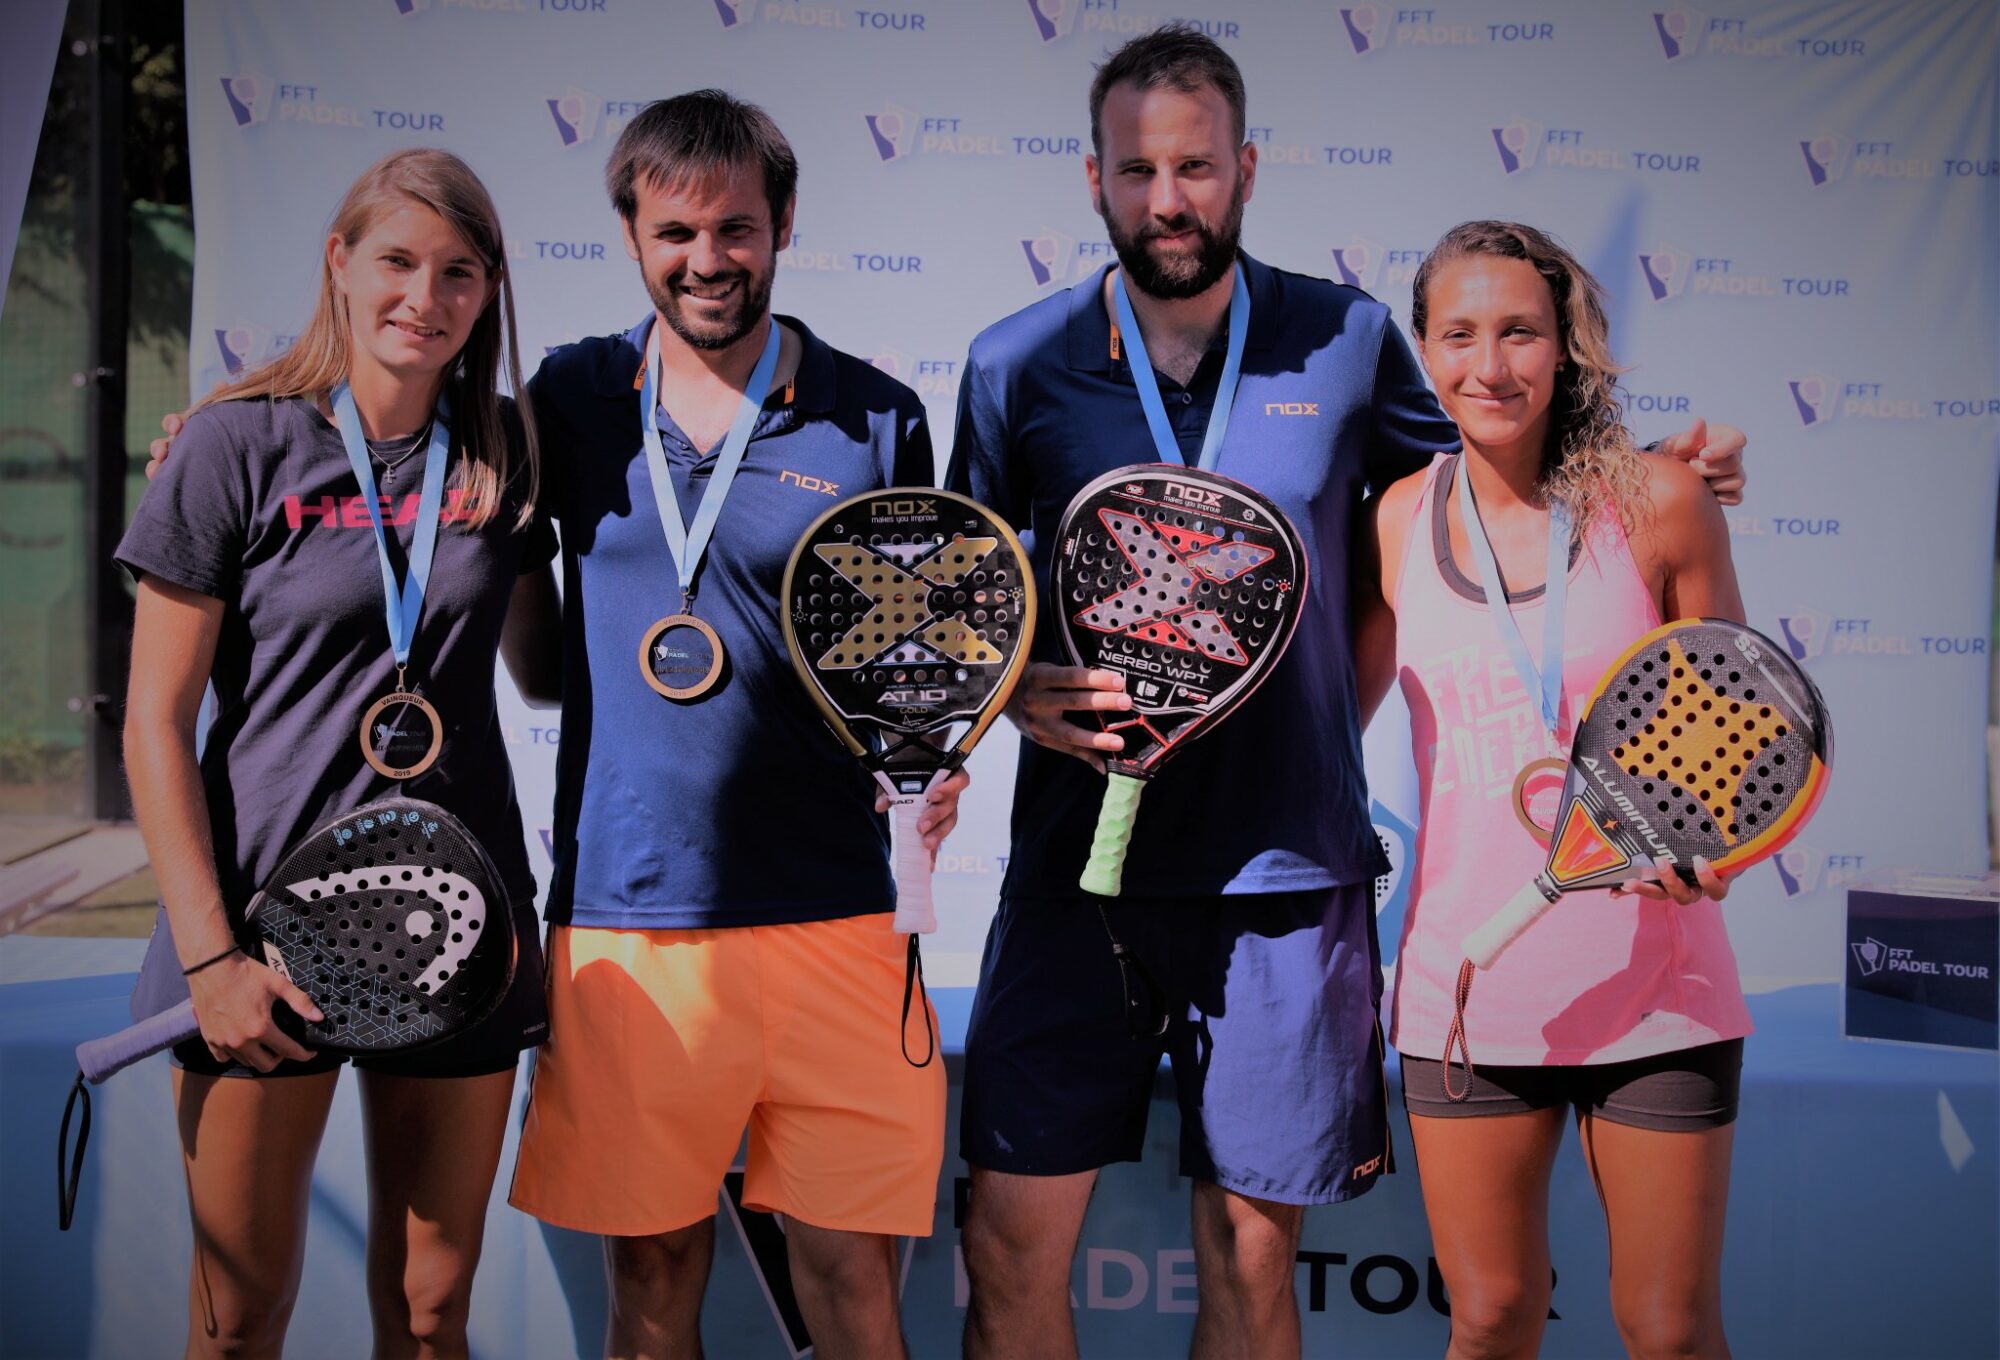 Collombon / Ginier – Maigret / Tison: In style at the FFT PADEL TOUR from Aix-en-Provence